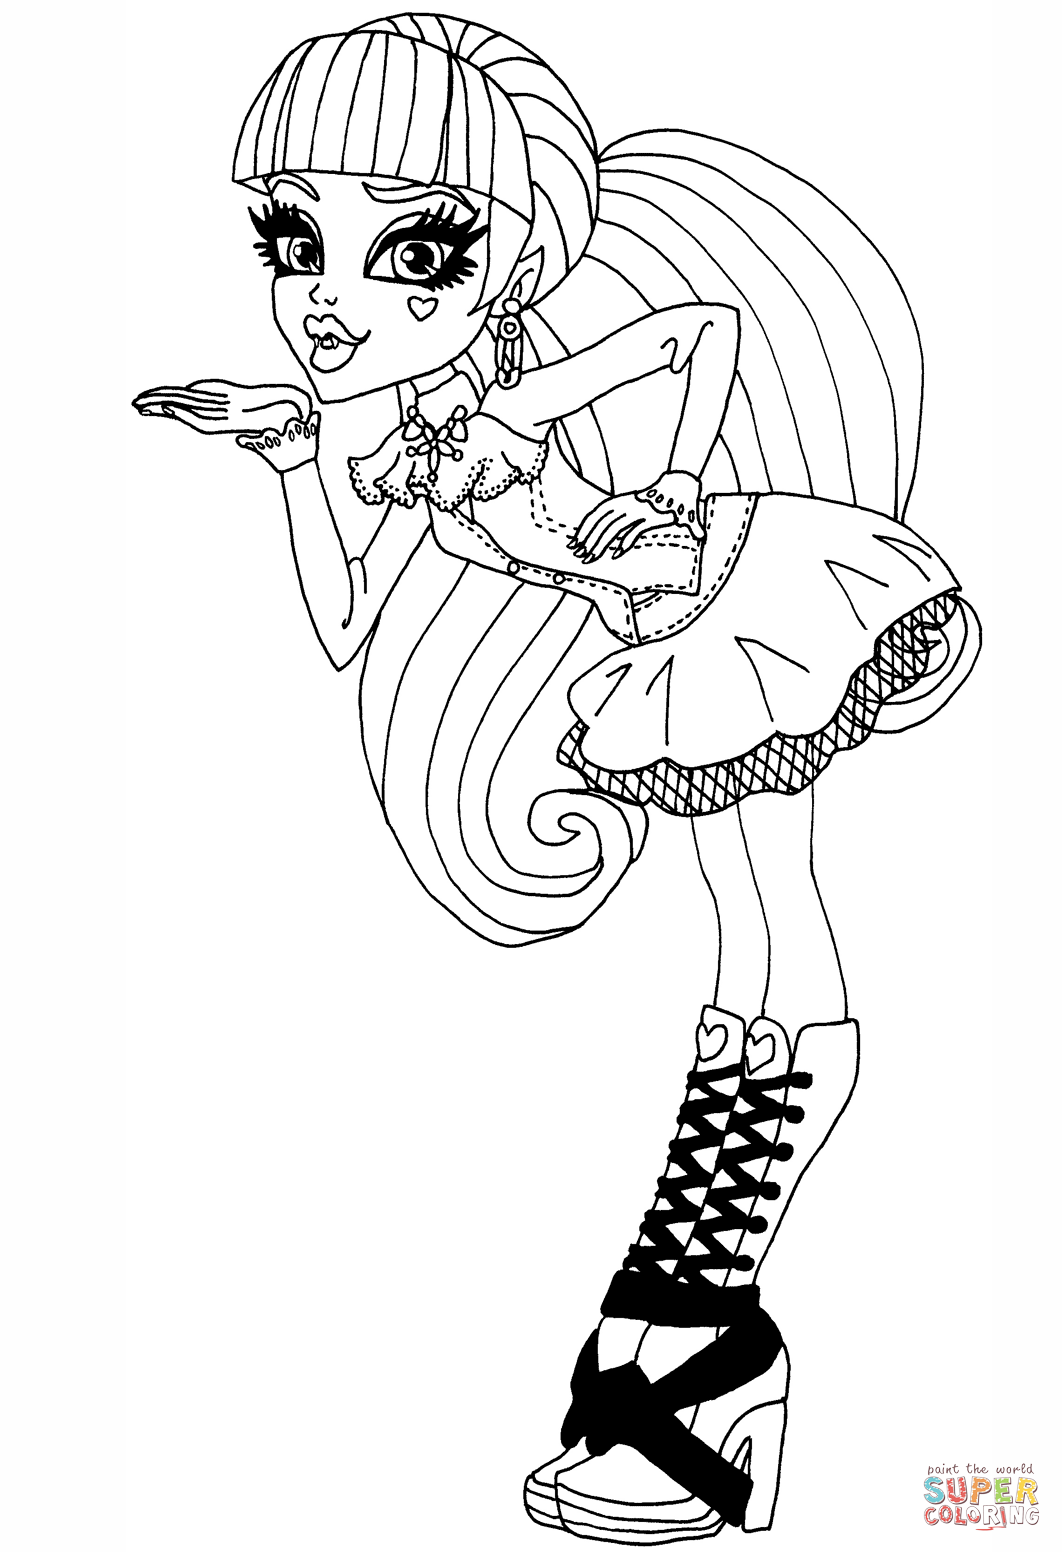 Draculaura coloring page free printable coloring pages